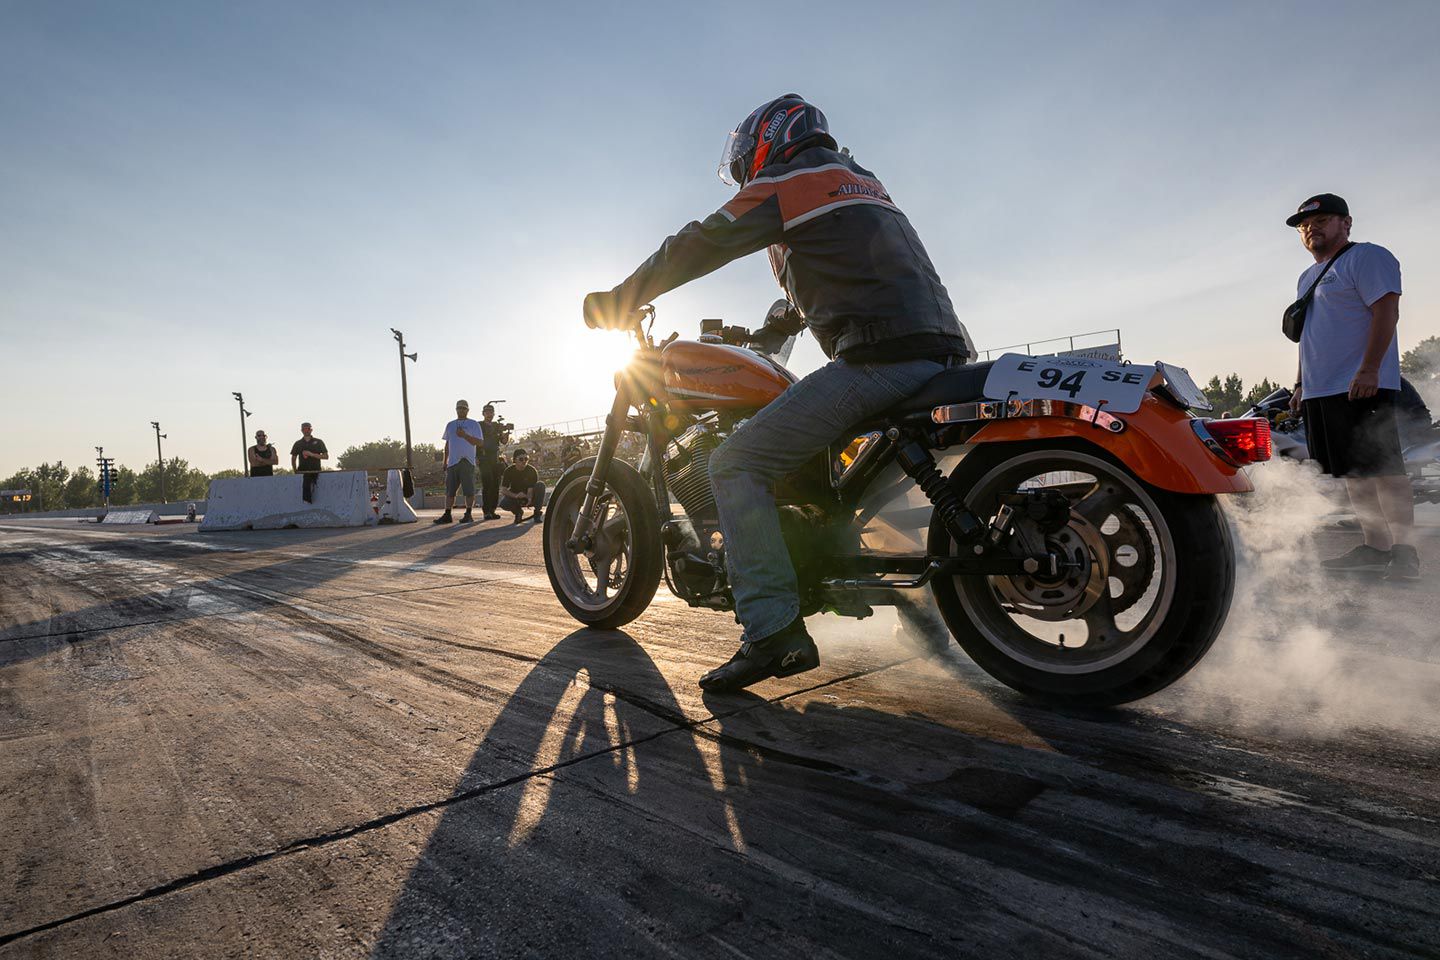 Run-what-you-brung, tires sold separately. The 8th Annual Free Baker Drivetrain drags at the Sturgis Dragstrip.